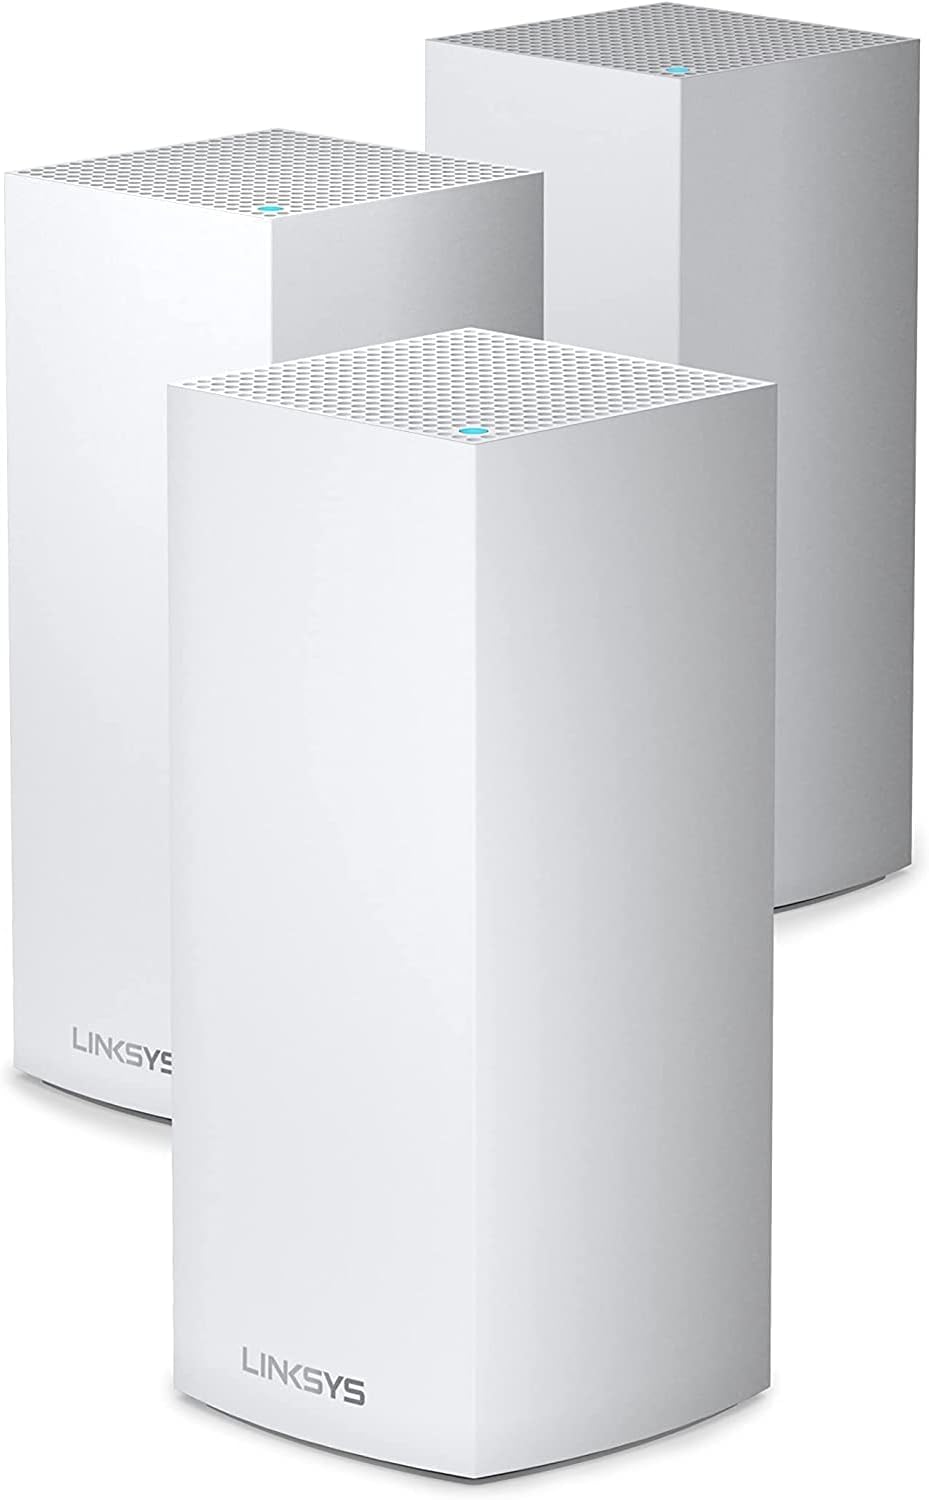 Linksys Velop WiFi 6 Router Home WiFi Mesh System, Tri-Band, 8,100 Sq. ft Coverage, 120+ Devices, Speeds up to (AX4200) 4.2Gbps - MX12600